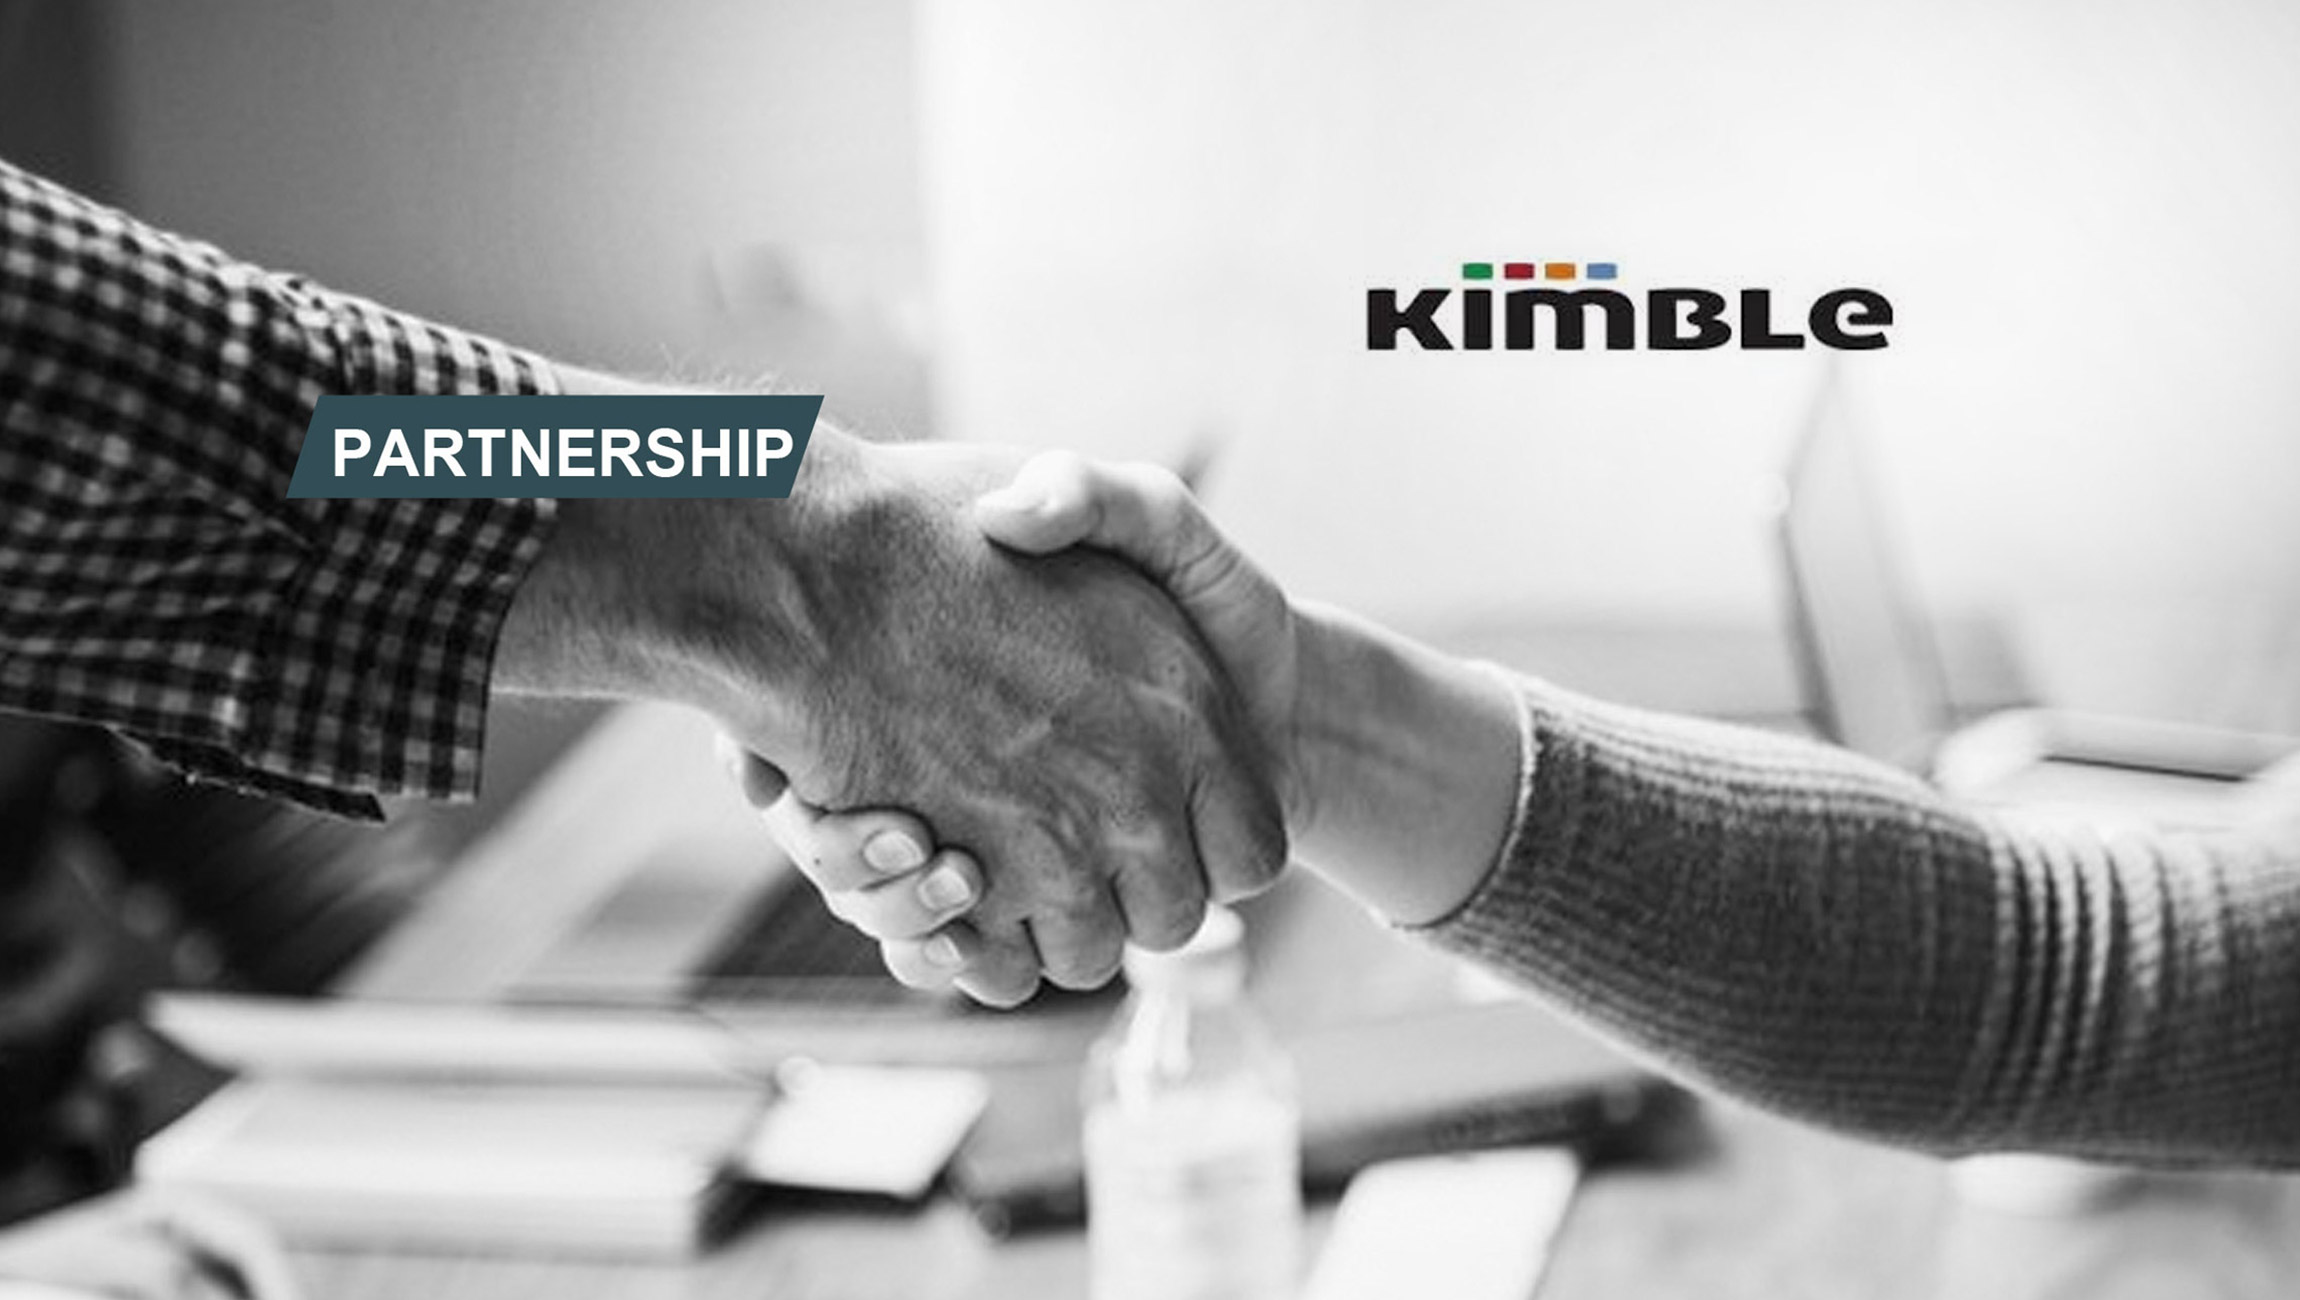 Kimble Applications Partners with Infor to Deliver Professional Services Automation Solutions to Customers